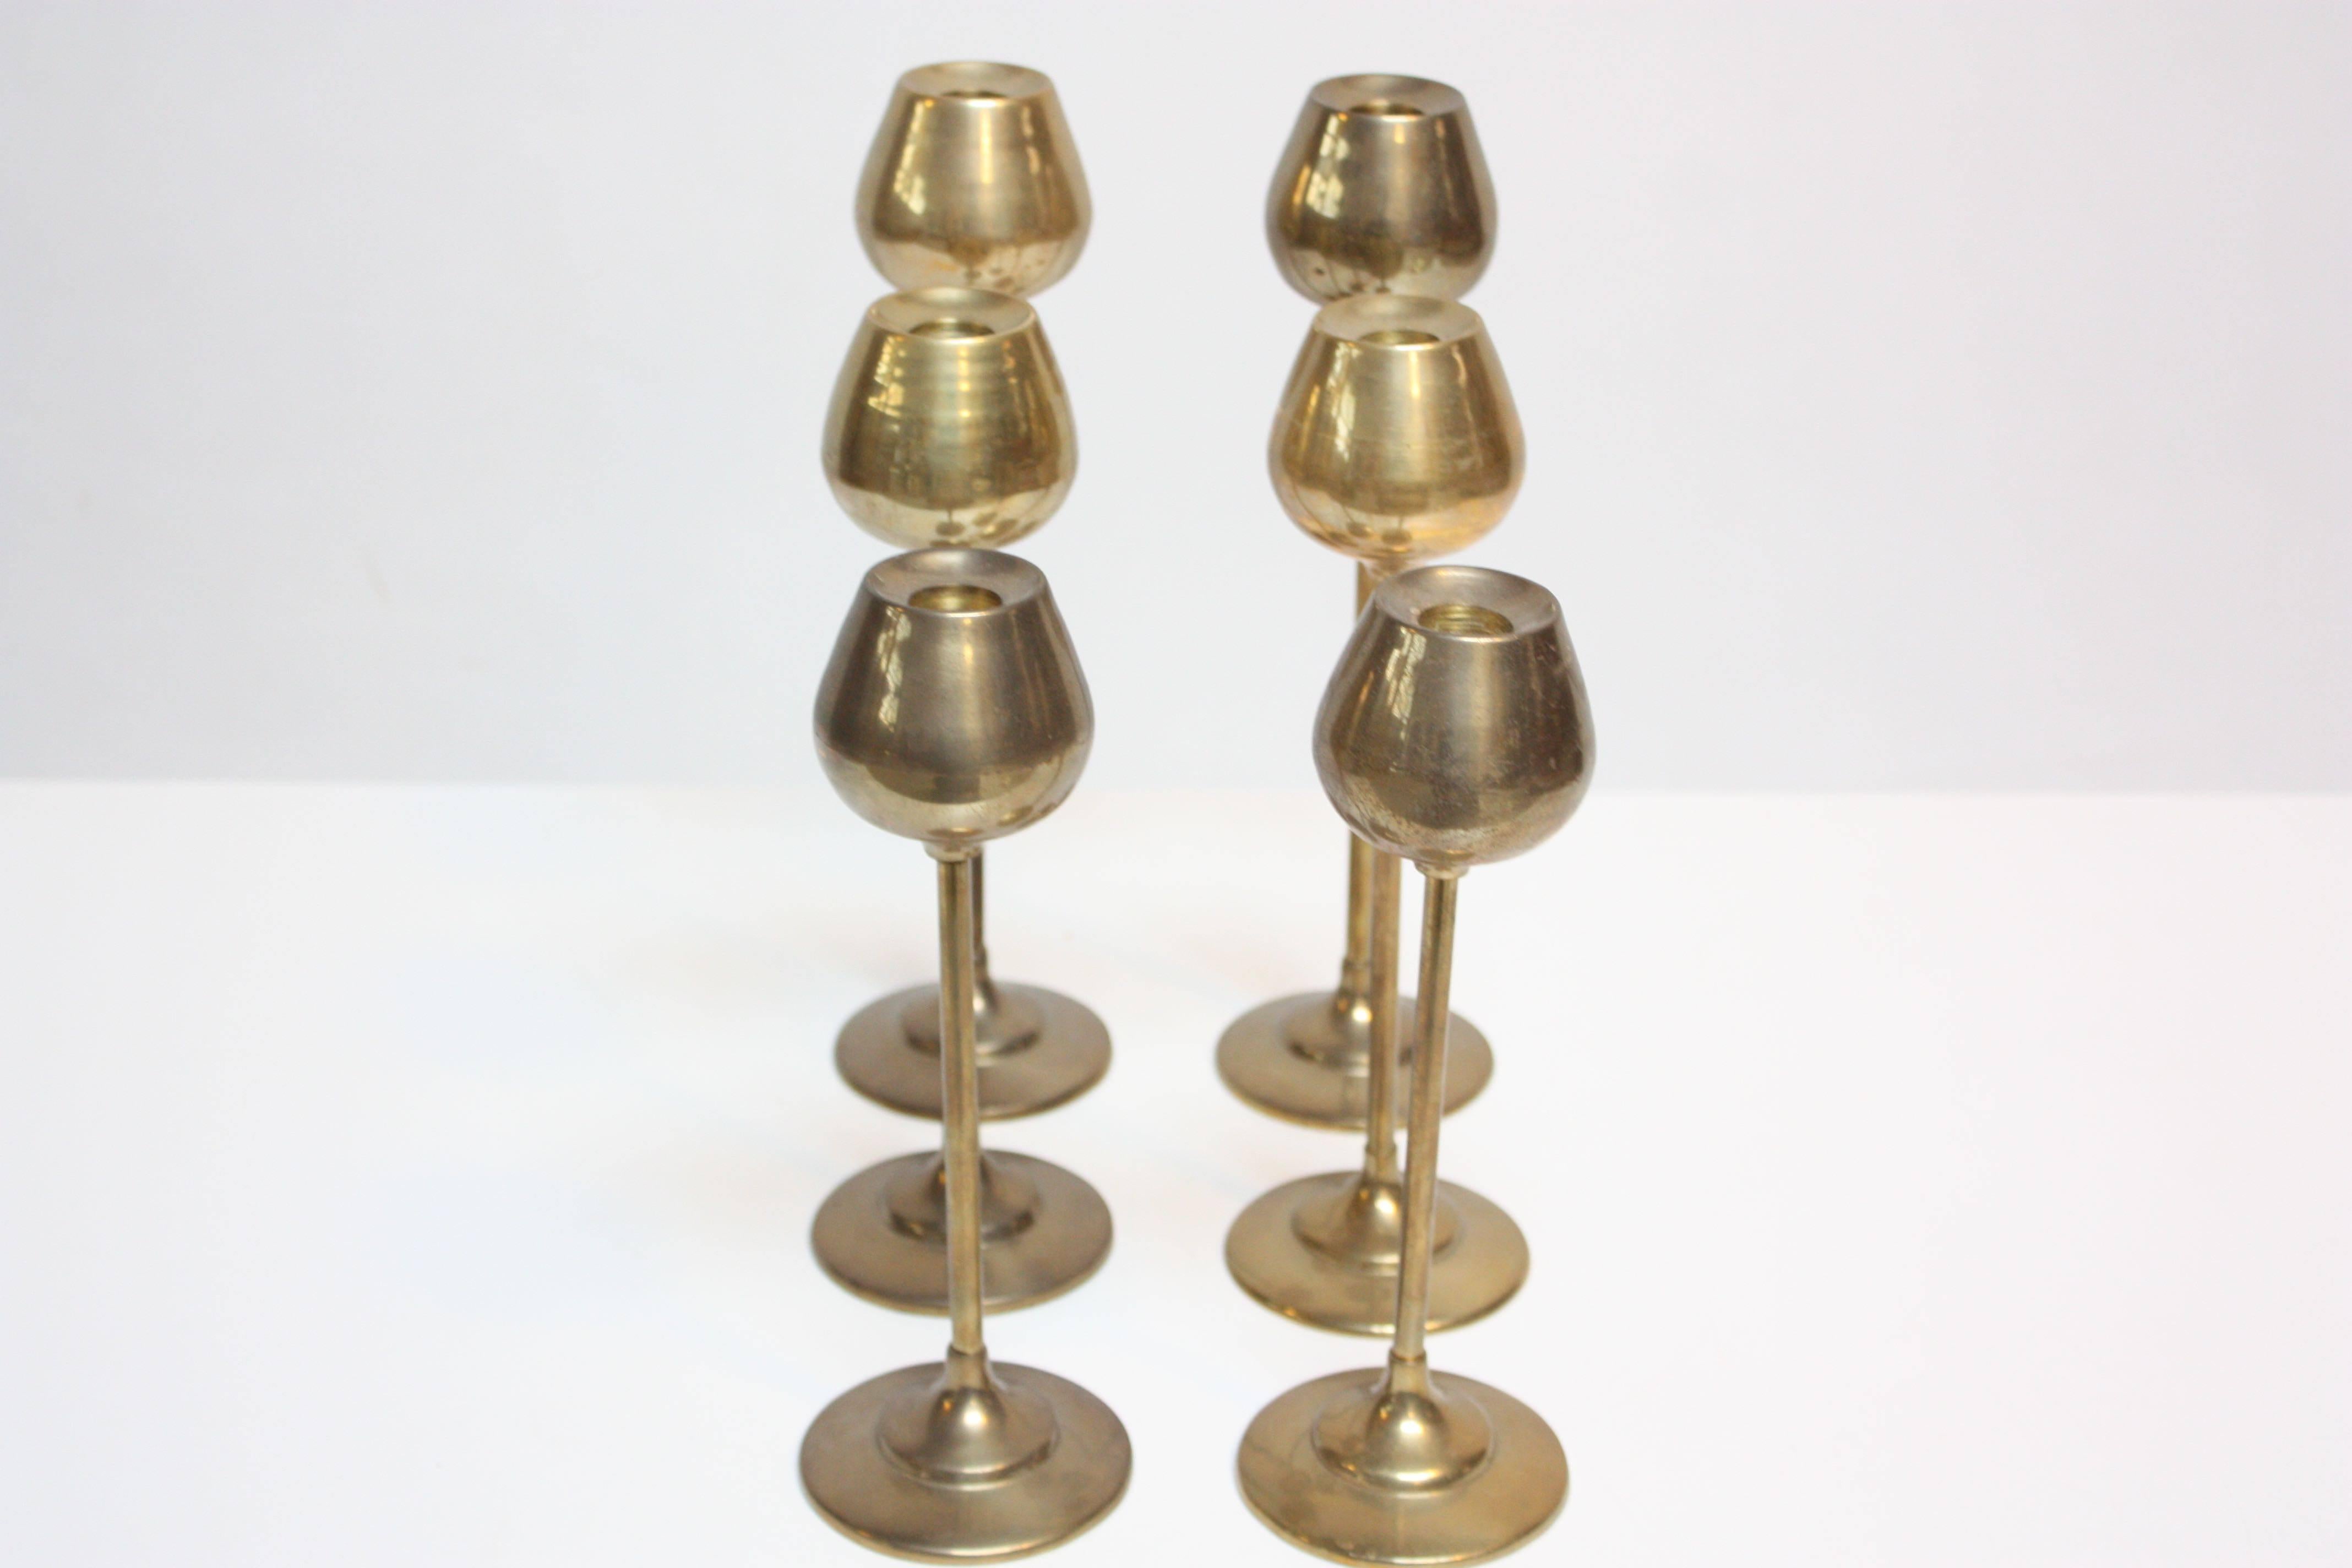 Circa 1960s Rosenthal Netter solid brass candlesticks. Age-commensurate wear / patina present; unpolished, original condition. All dimensions are the same except height:
Tall: 11.5